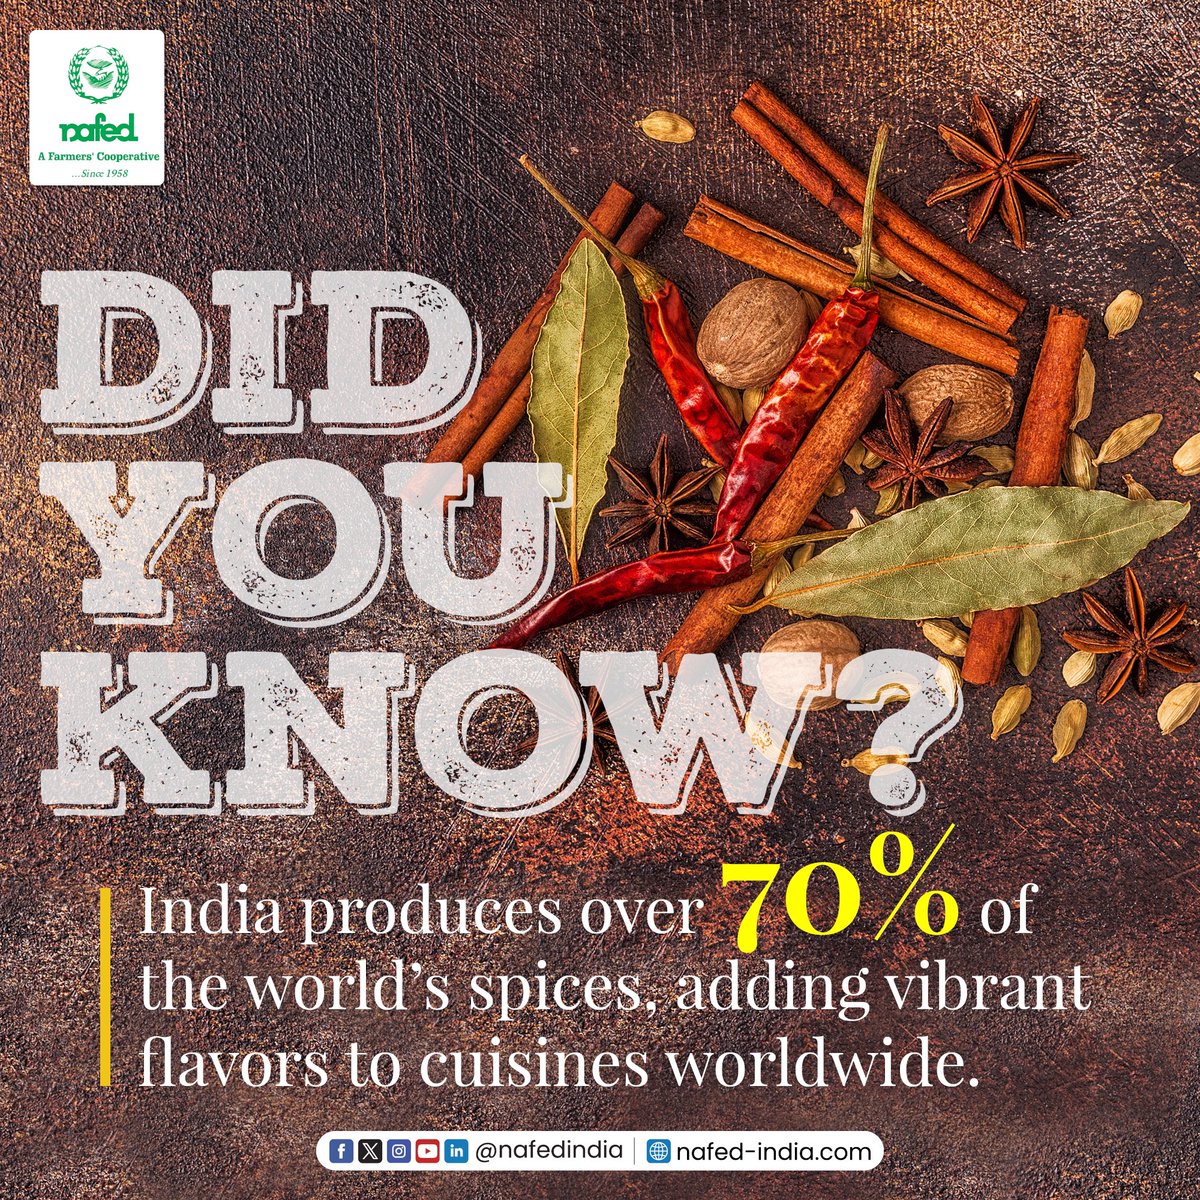 India produces most of the world's spices, which are widely used to add flavor to dishes globally. The country's diverse climate and regions support the cultivation of a variety of spices like cumin, turmeric, and cardamom.

#NAFED #NafedIndia #DidYouKnow #spices #didyouknowfacts